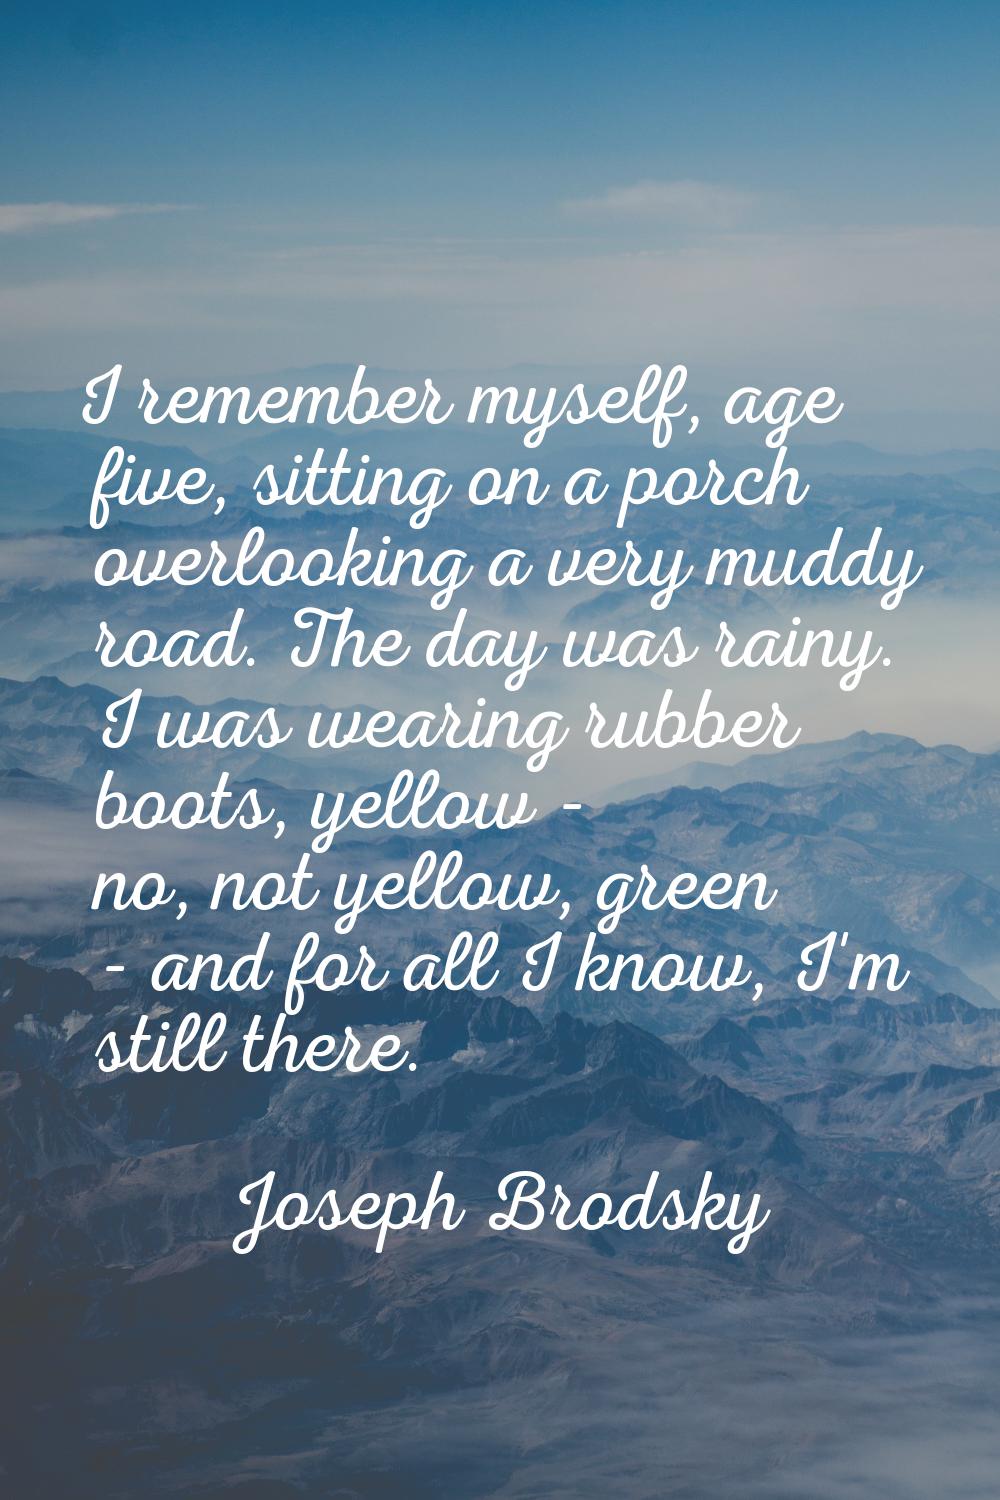 I remember myself, age five, sitting on a porch overlooking a very muddy road. The day was rainy. I